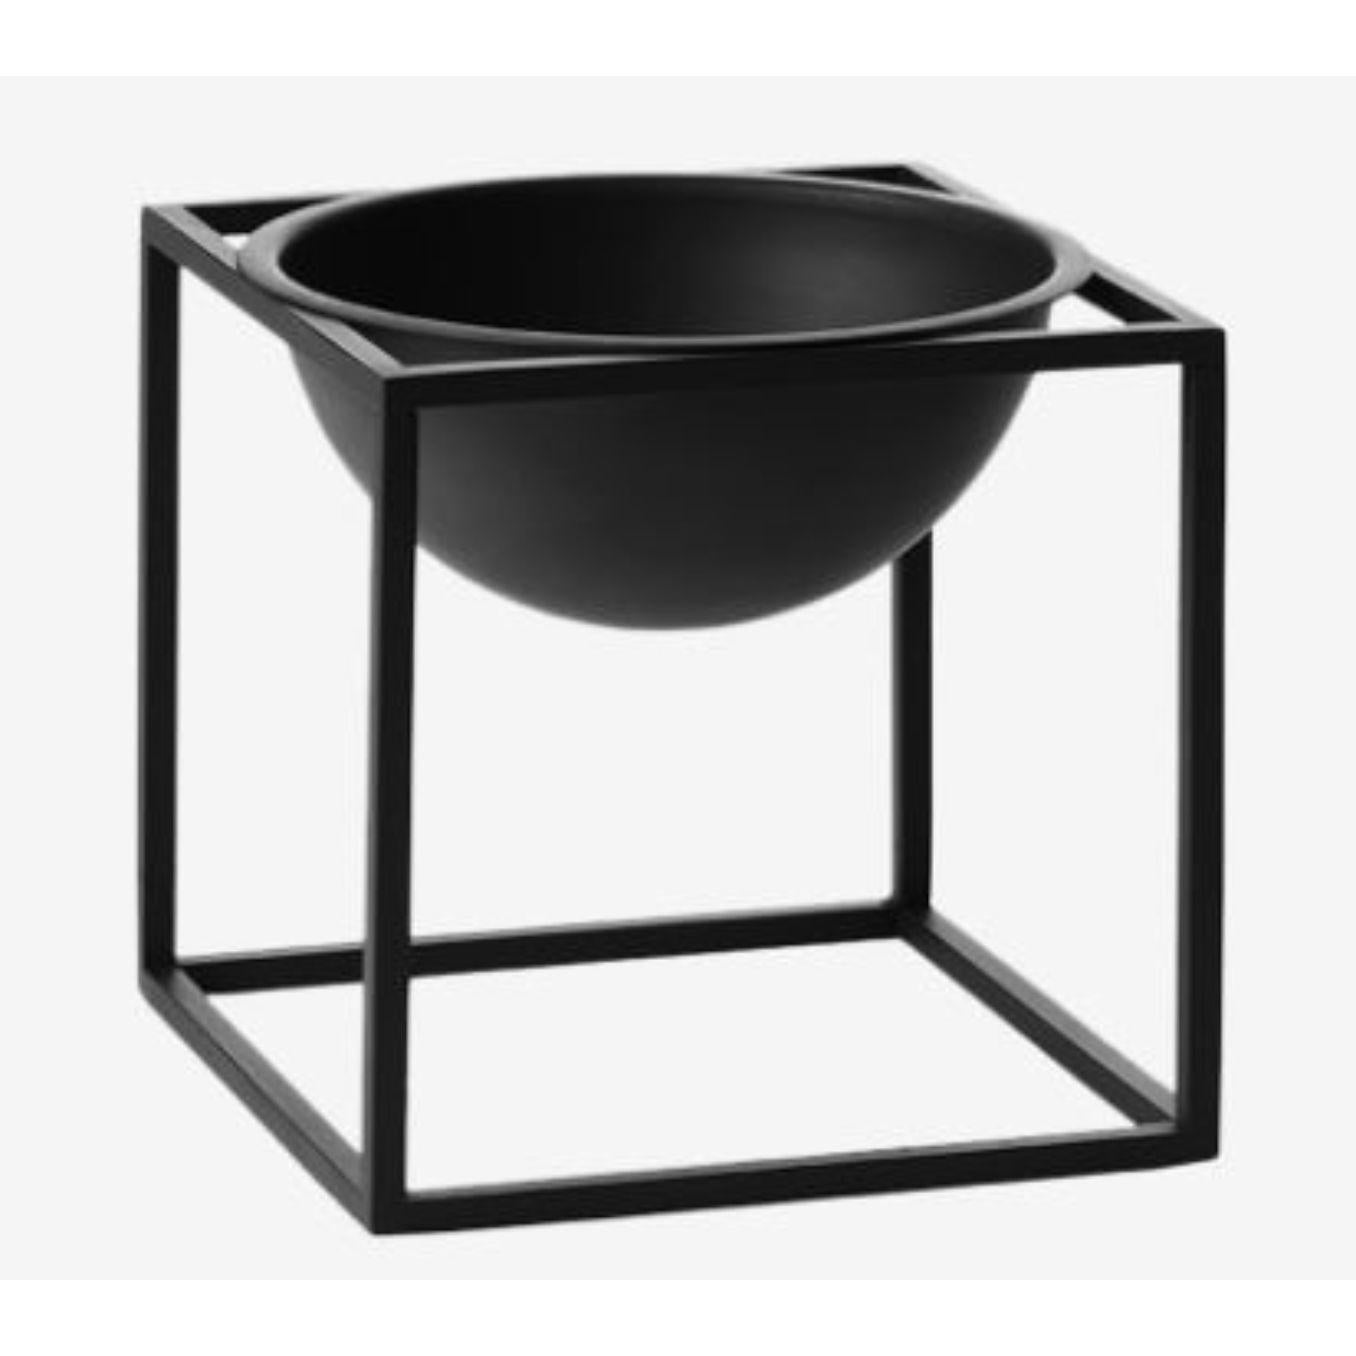 Black small kubus bowl by Lassen
Dimensions: D 14 x W 14 x H 14 cm 
Materials: Metal 
Weight: 1.35 kg

Kubus bowl is based on original sketches by Mogens Lassen, and contains elements from Bauhaus, which Mogens Lassen took inspiration from.